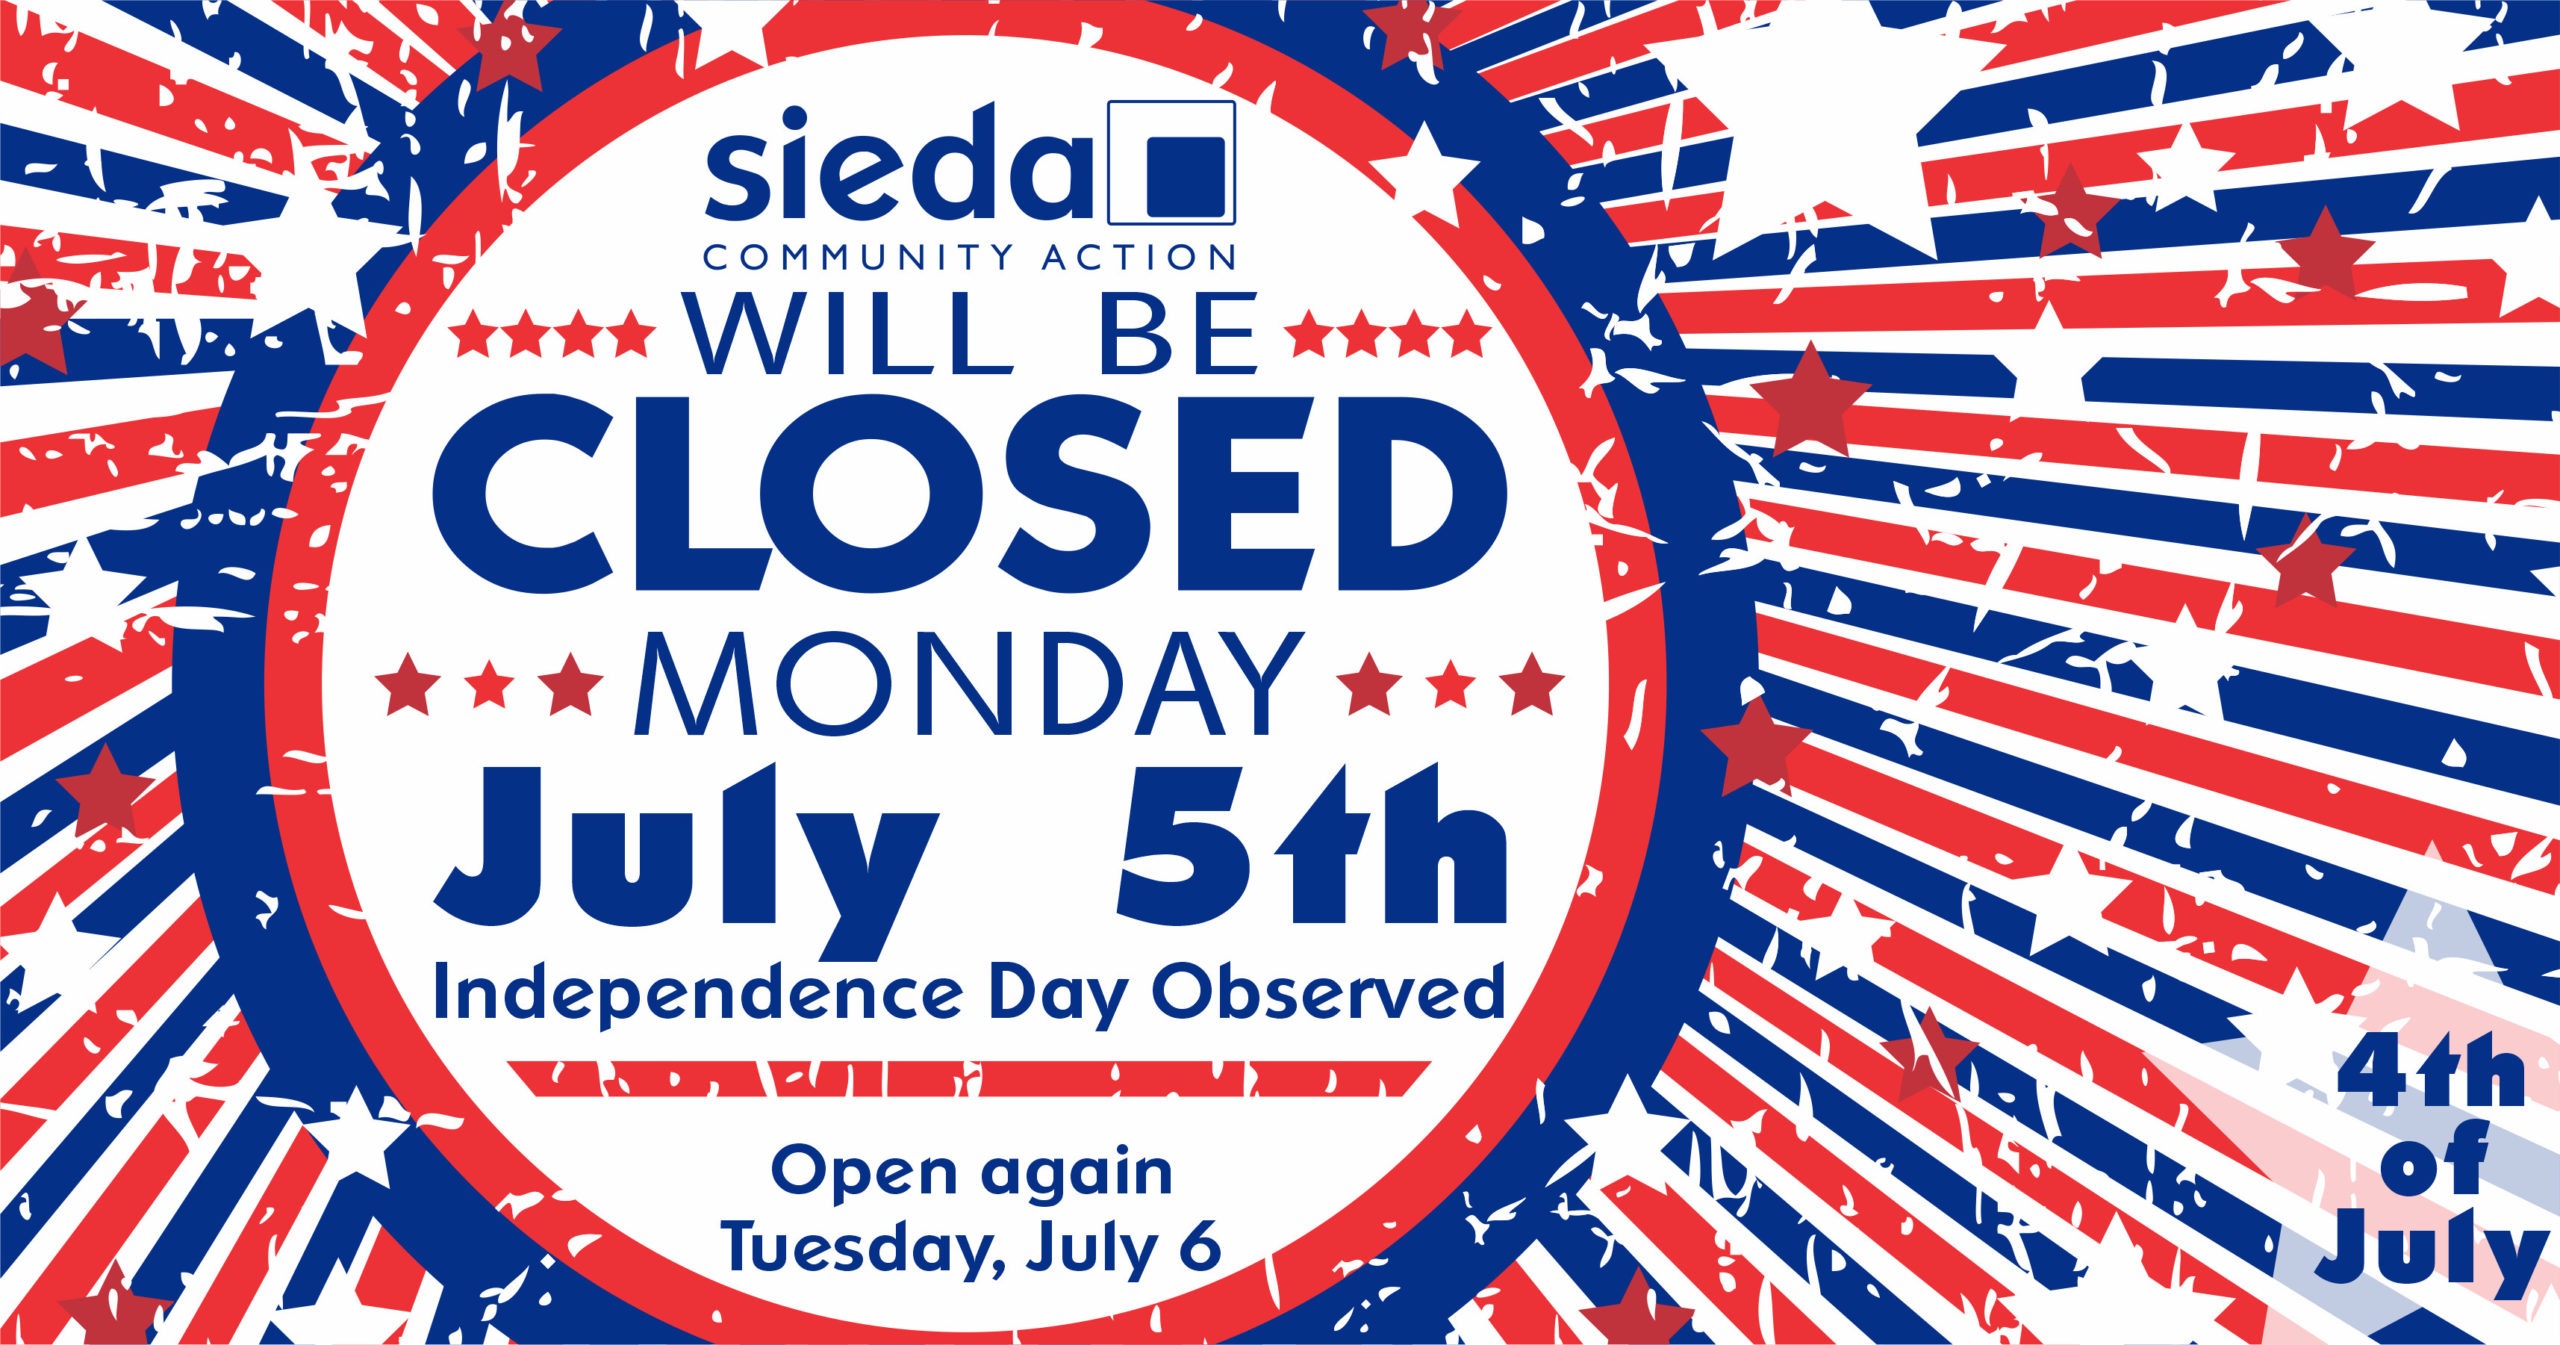 Sieda will be Closed July 5th for Independence Day Sieda Community Action